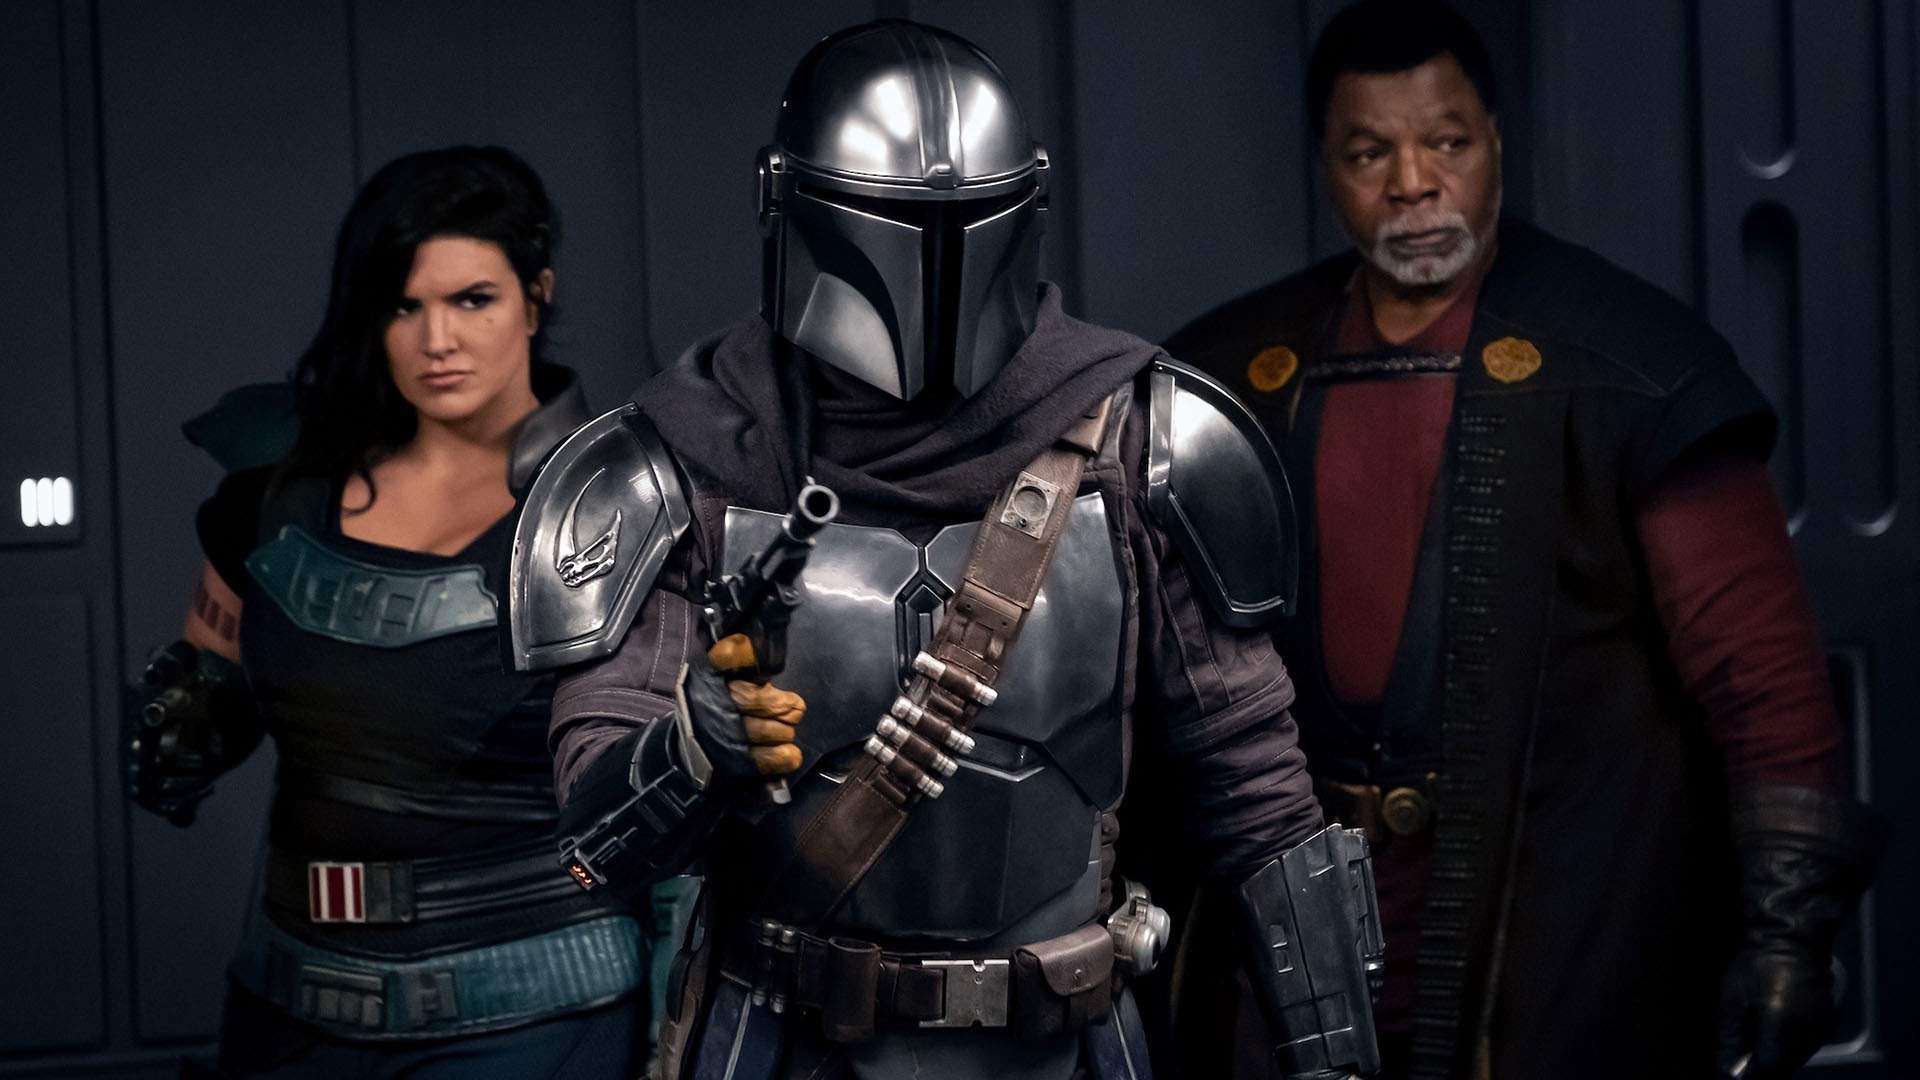 The New Trailer for 'The Mandalorian' Season Two Teases More Action-Packed Bounty Hunter Adventures